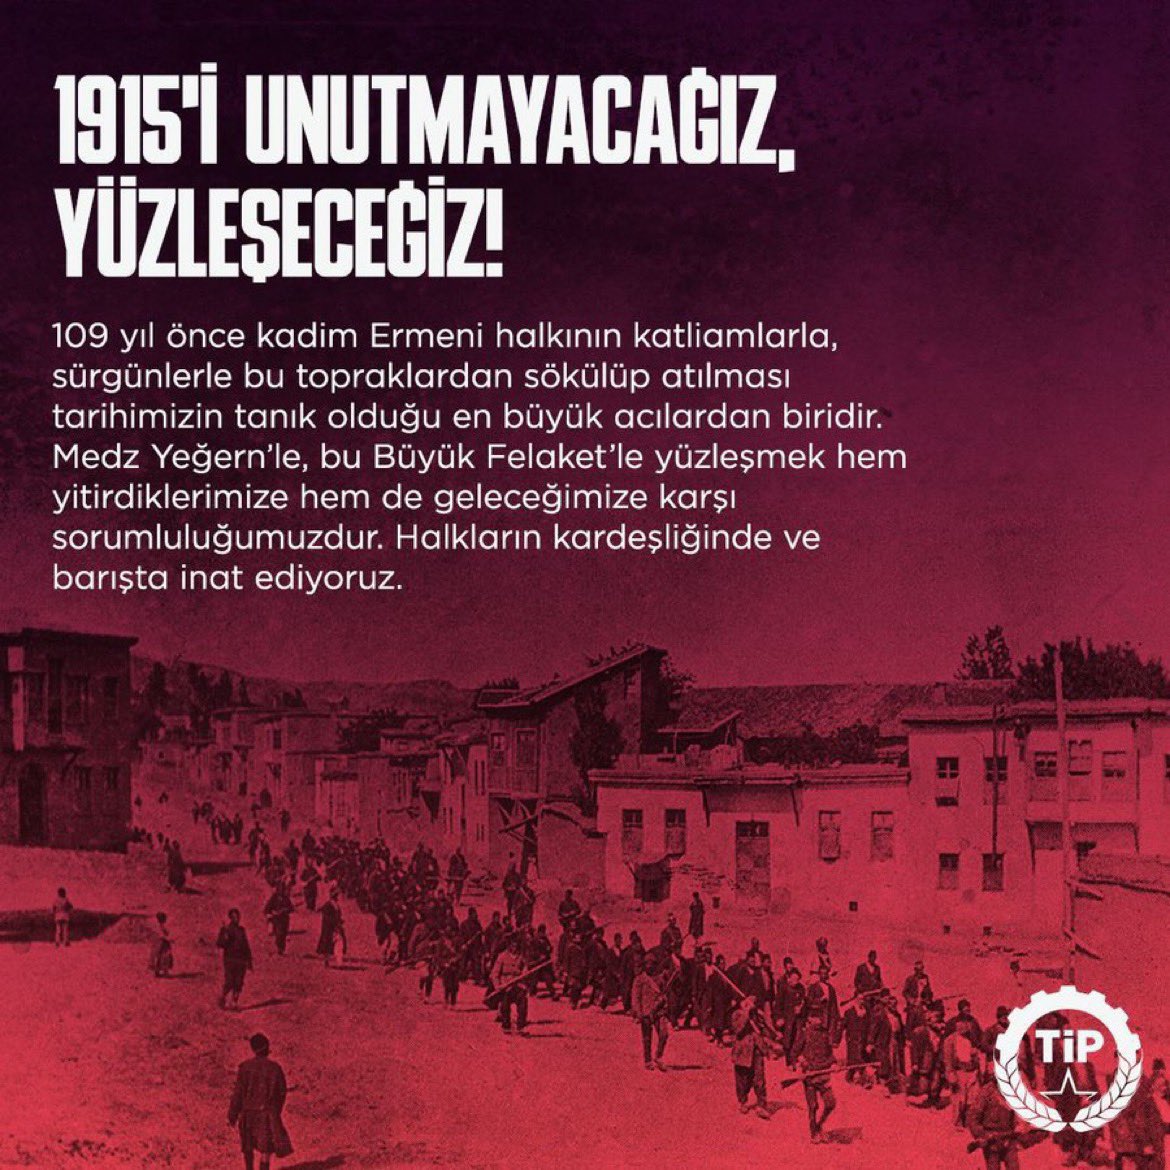 Workers' Party of Türkiye: 'The expulsion and massacre of the ancient Armenian people from these lands 109 years ago is one of the greatest sorrows witnessed in our history.'